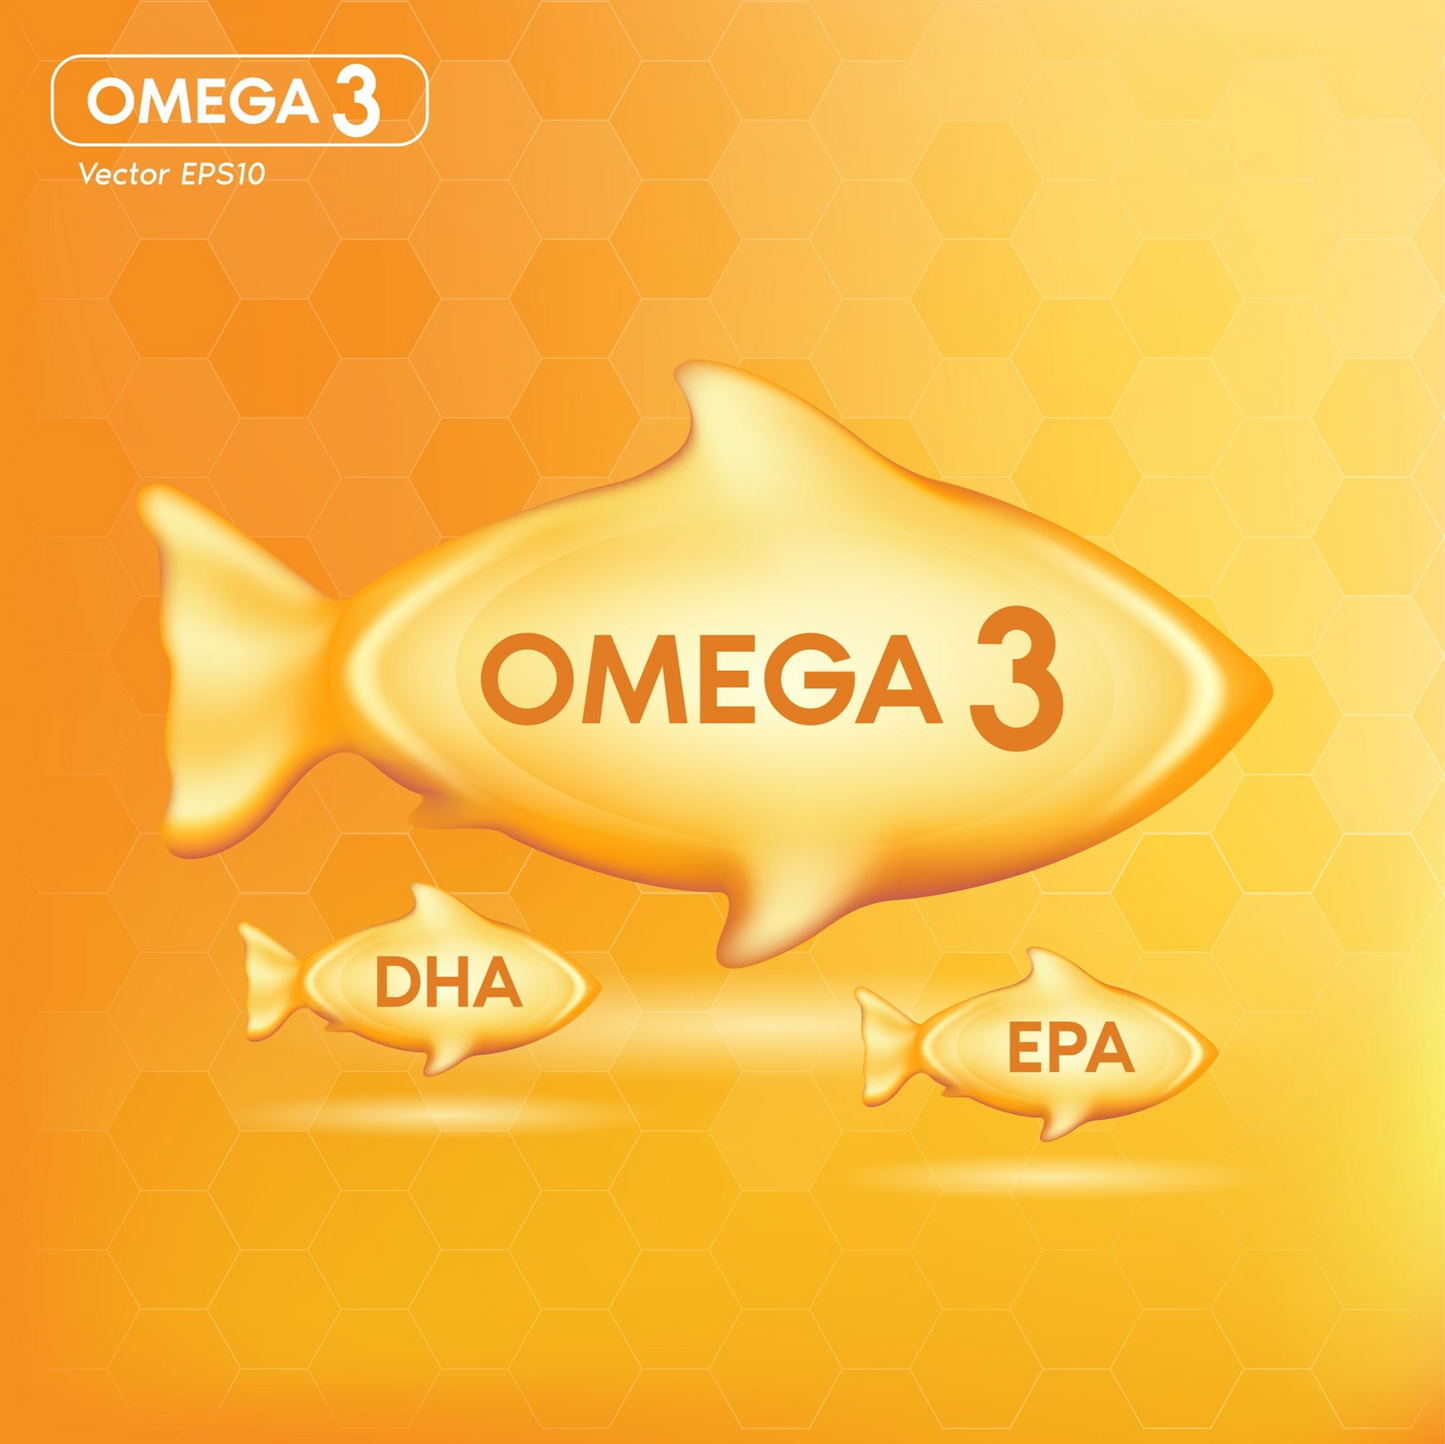 Dr. Gutman's® Omega-3 Fish Oil, Supports Heart Health with Omega 3, EPA & DHA, 60 Rapid Release, Burpless Softgels formulated from pelagic Fish Oil in Pristine Ocean Waters